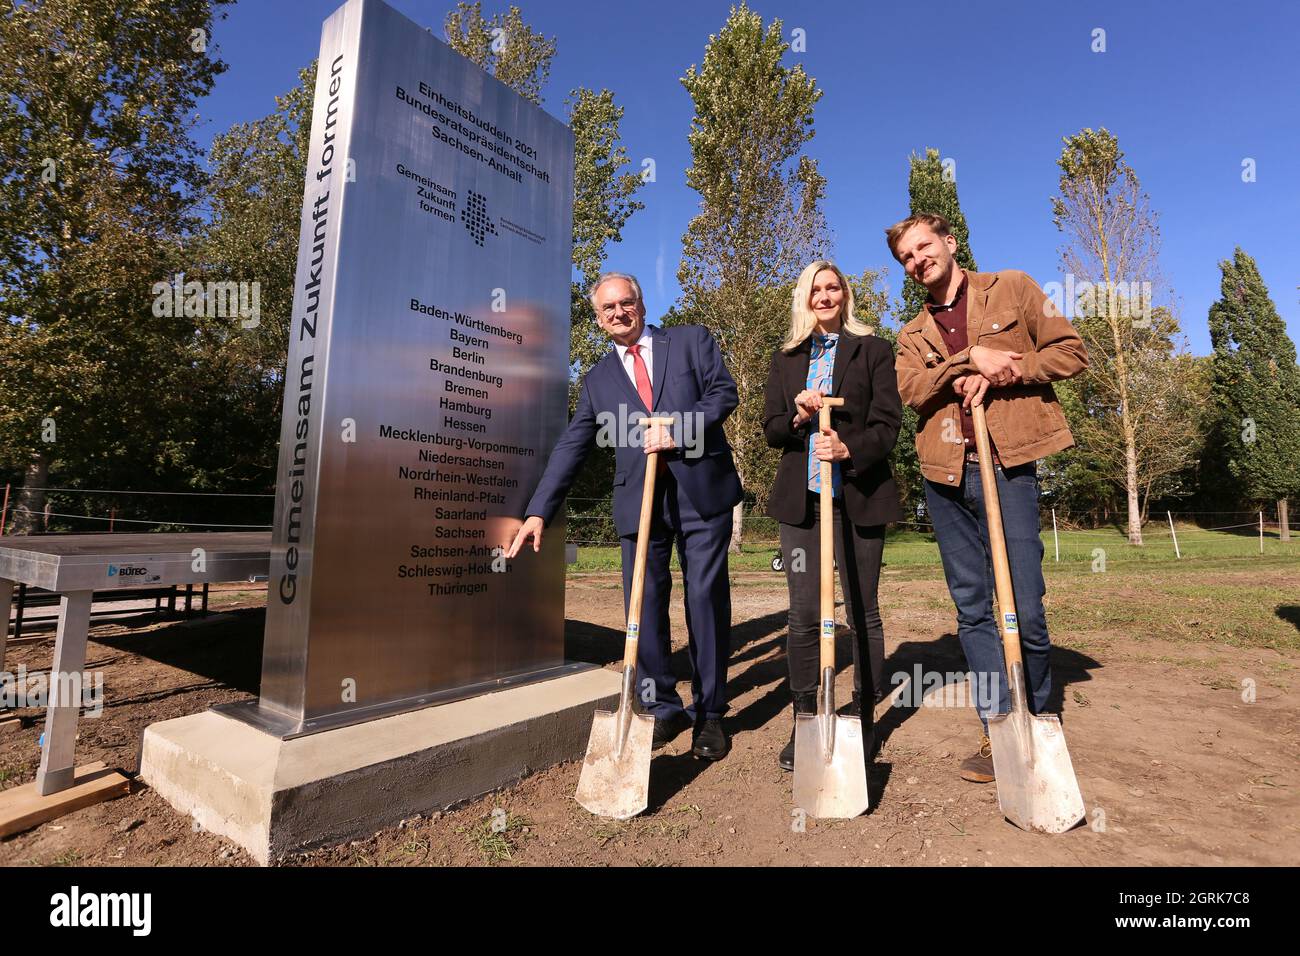 01 October 2021, Saxony-Anhalt, Hötensleben: Saxony-Anhalt's Prime Minister Reiner Haseloff (l) stands with the Unity Ambassadors from Saxony-Anhalt Kirstin Knaufmann and Falk Schuster near the Hötensleben border memorial in front of a stele that was unveiled together with all the Unity Ambassadors from all the federal states. Photo: Matthias Bein/dpa-Zentralbild/ZB Stock Photo